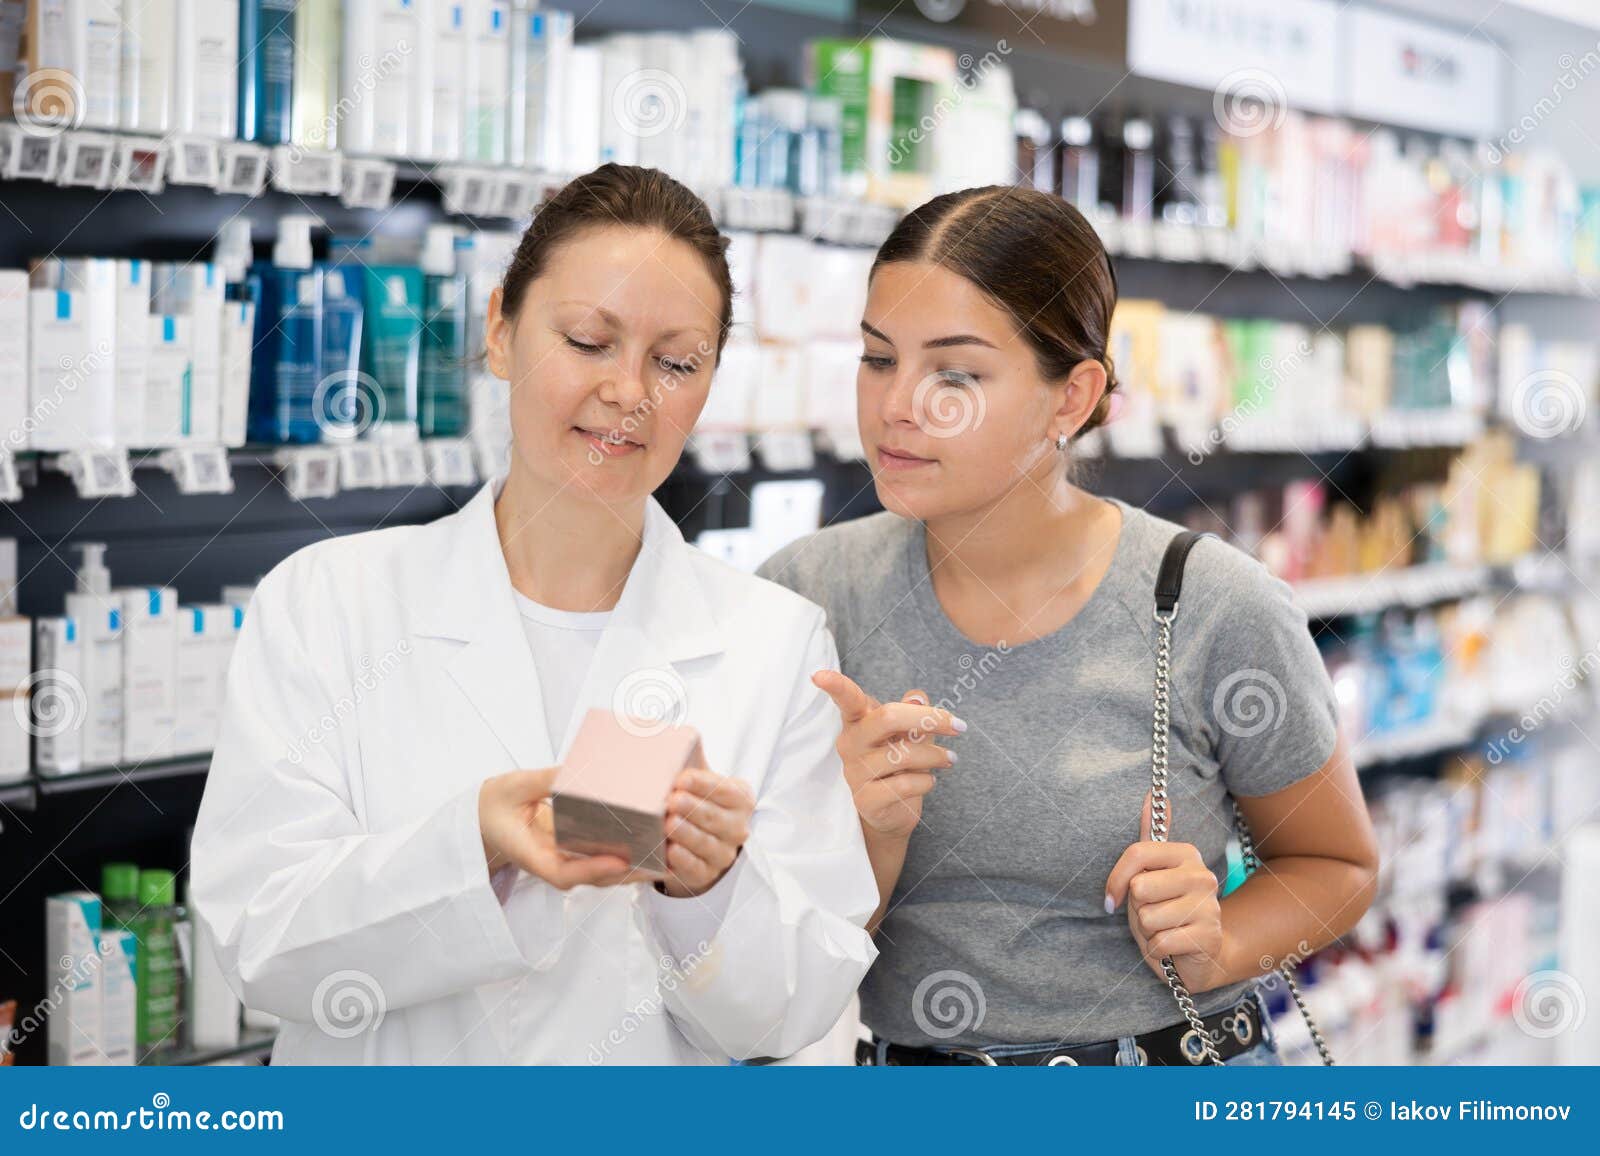 Female Pharmacist Advises a Woman Visitor a Good Skin Care Remedy ...